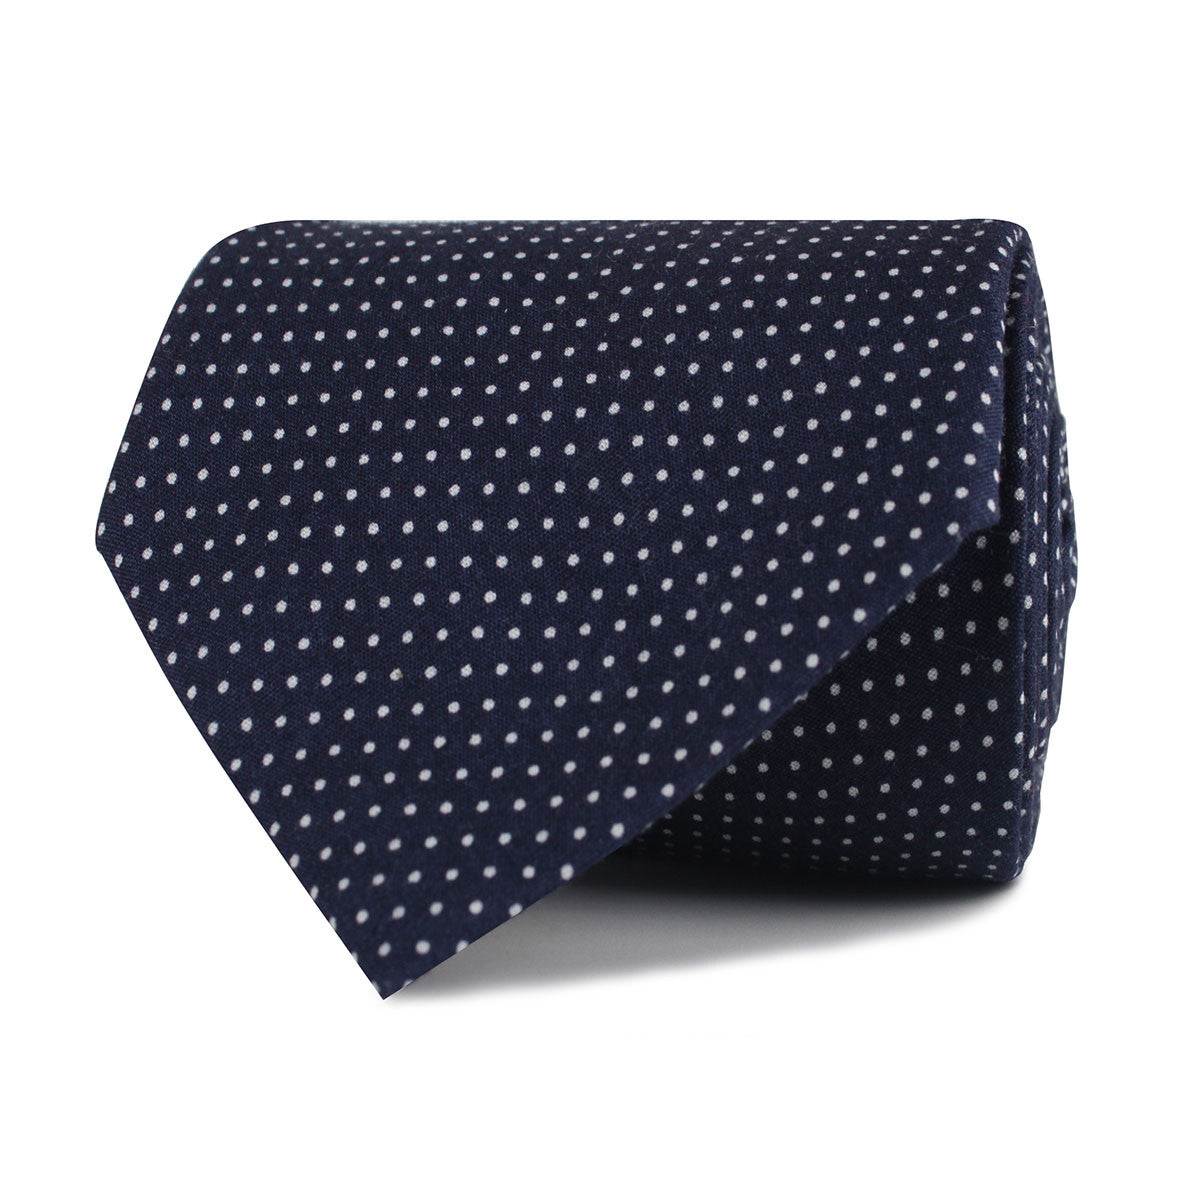 Navy Blue Cotton with White Mini Polka Dots Necktie Front Roll